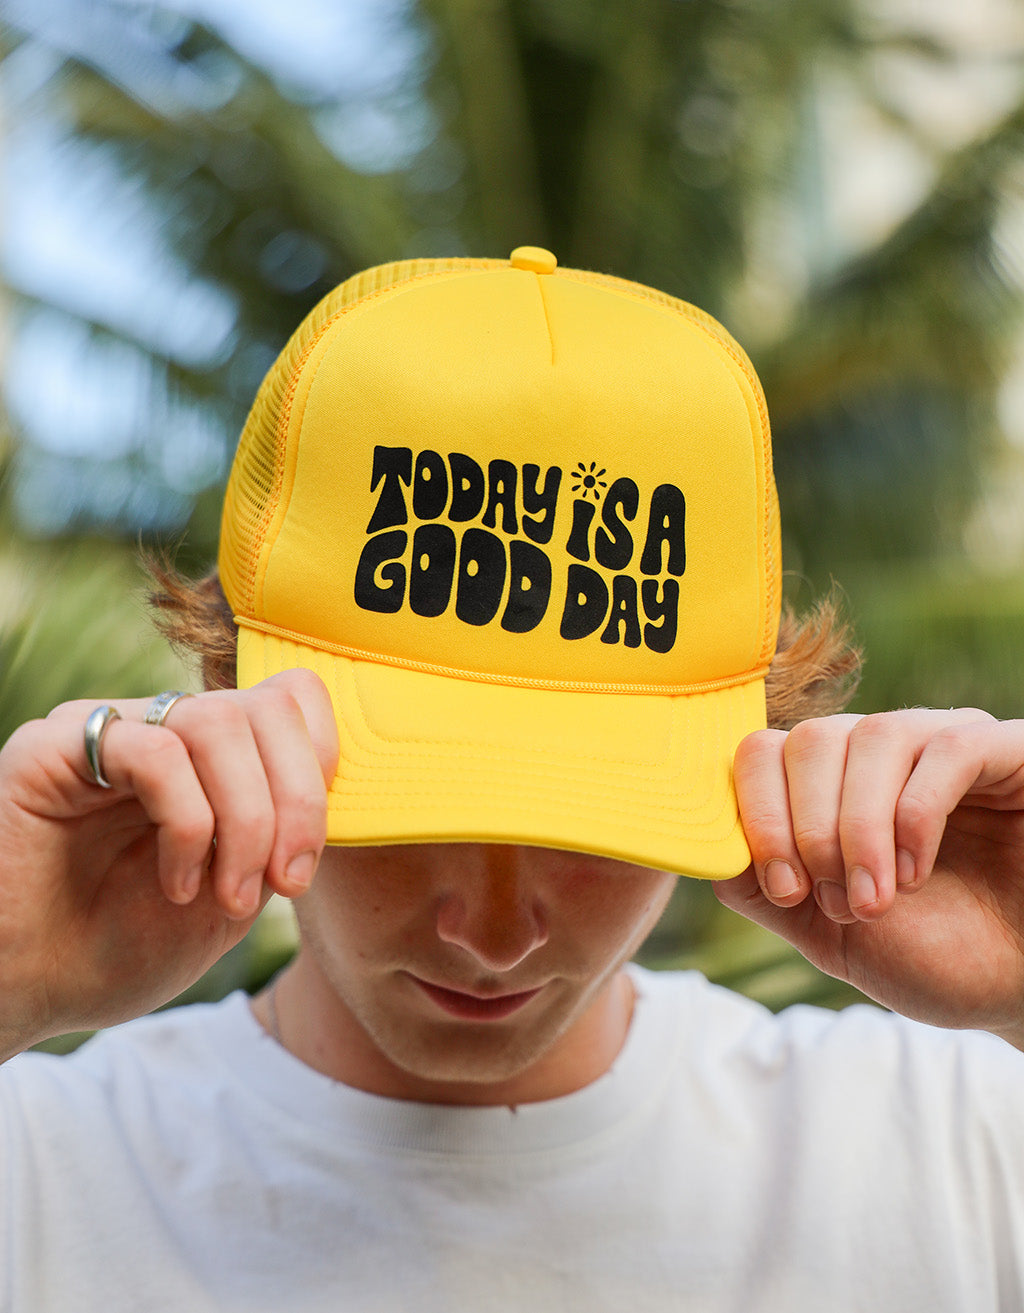 GROOVY TODAY IS A GOOD DAY TRUCKER HAT ☀️ YELLOW